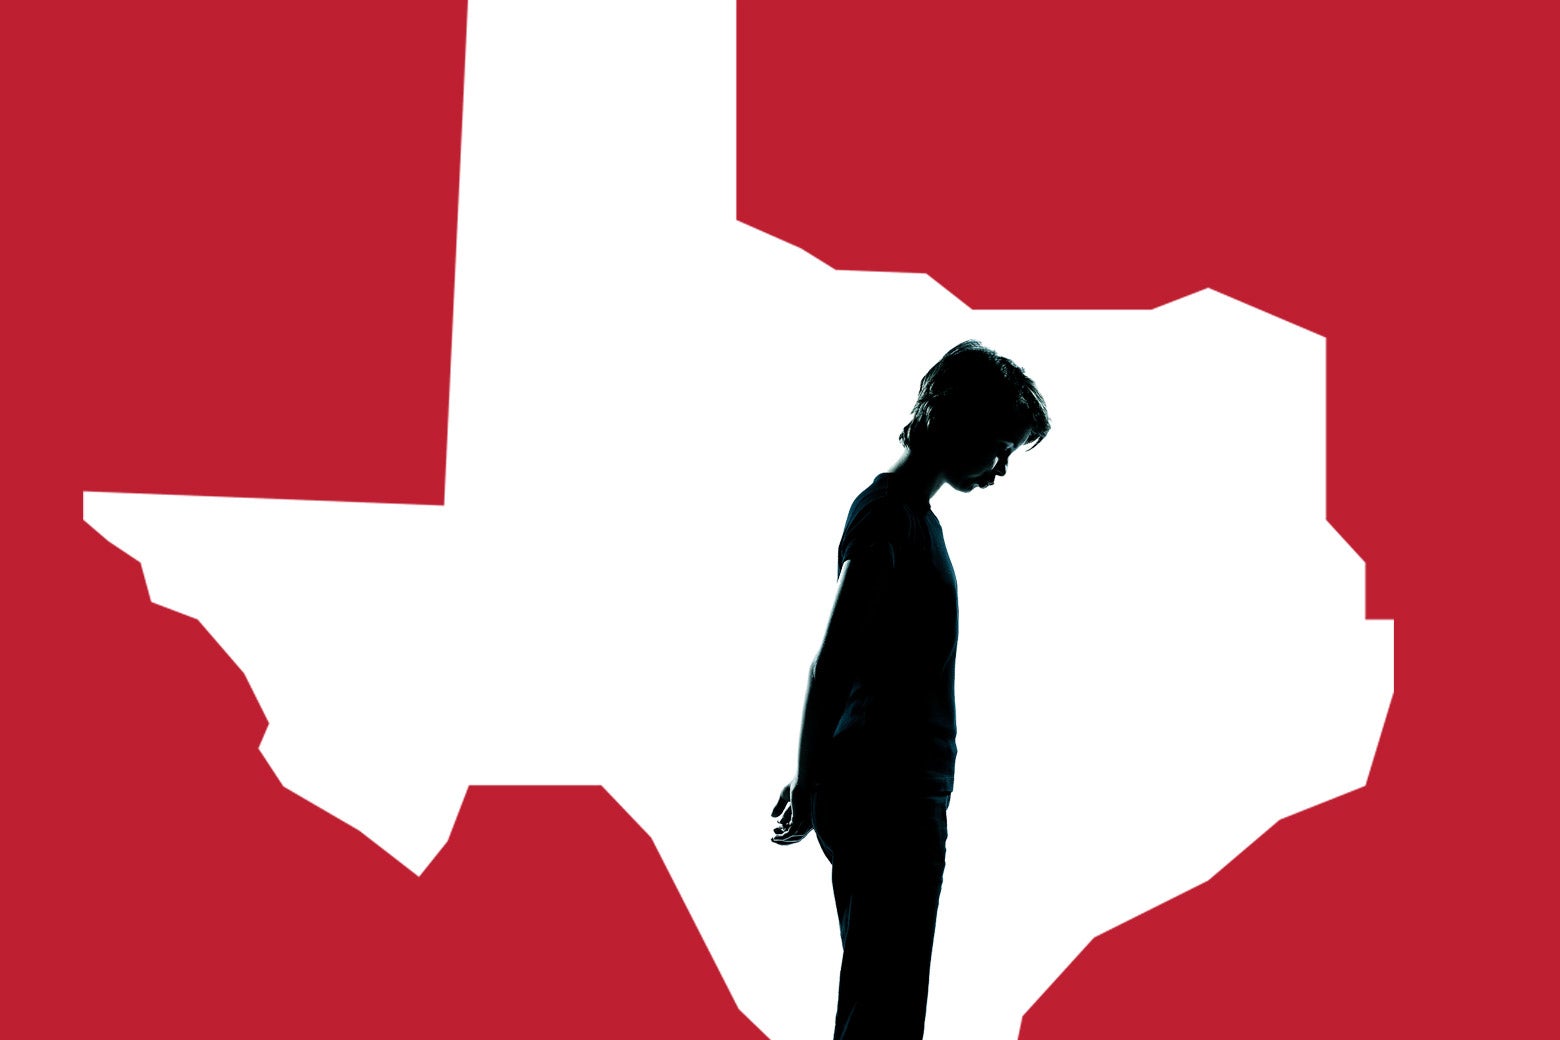 The silhouette of a teenager against the shape of the state of Texas.